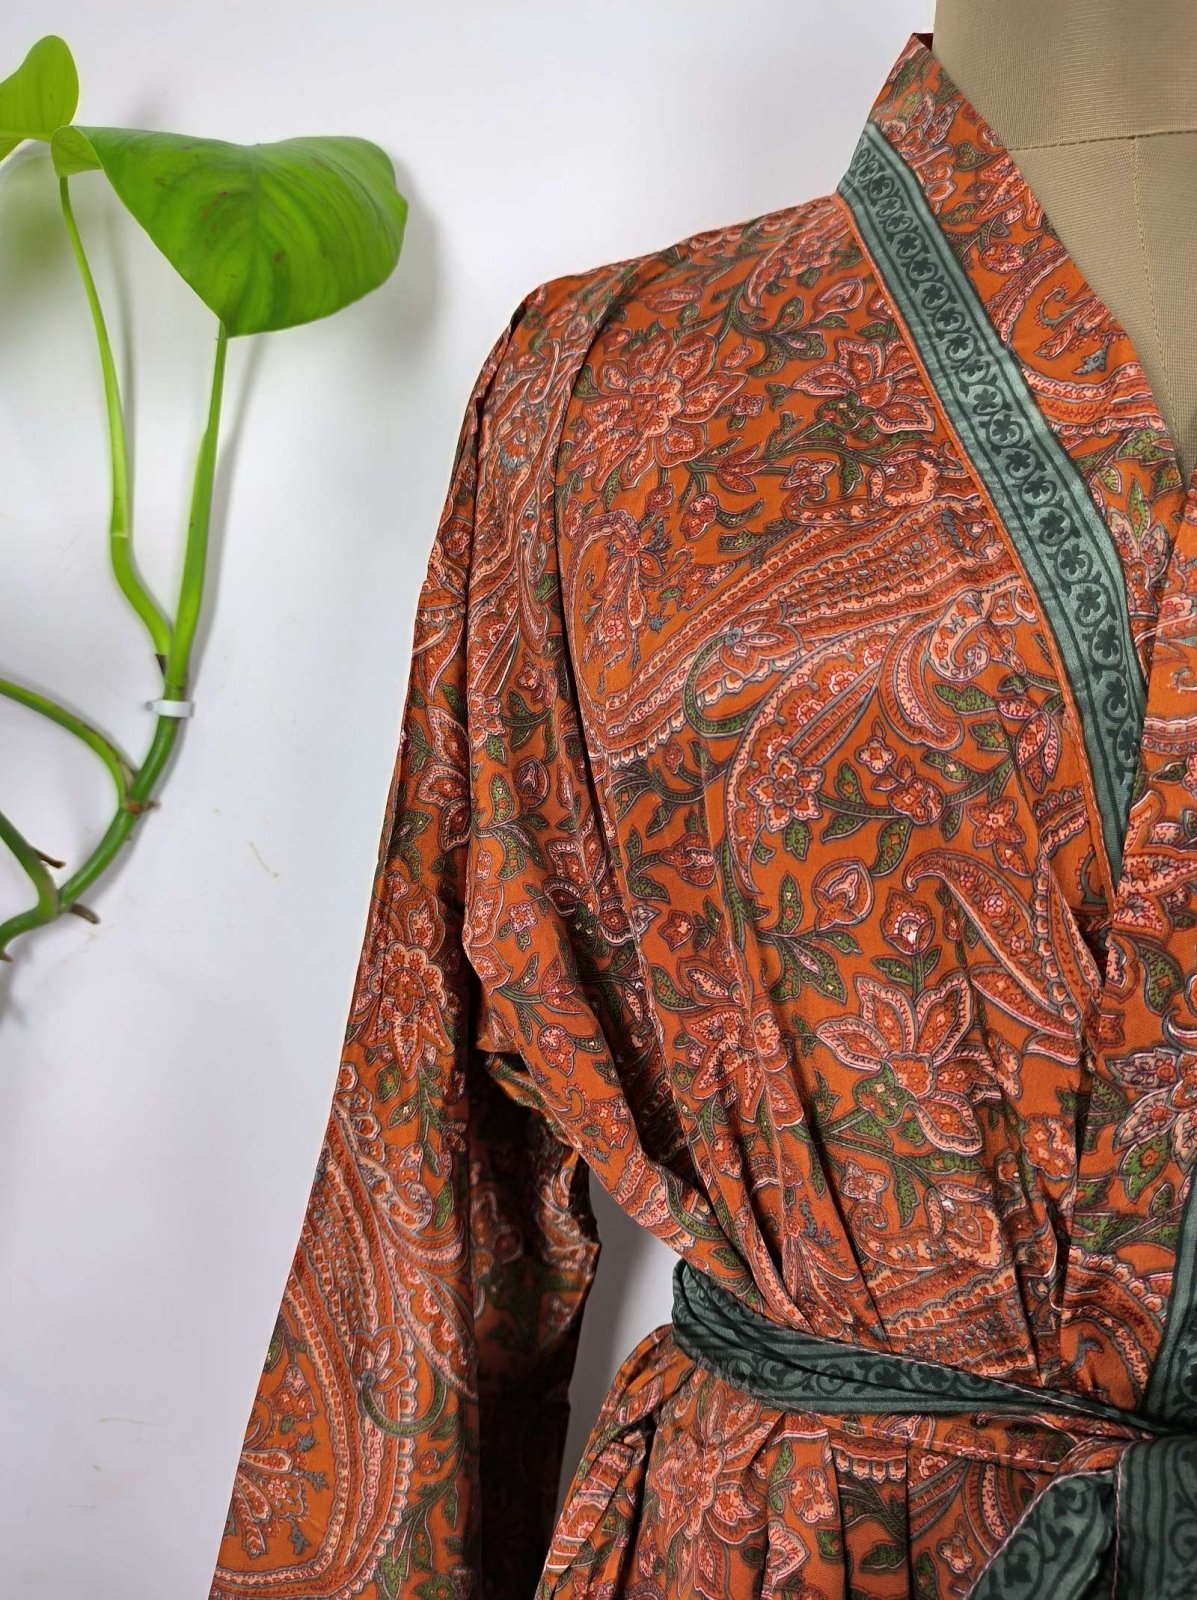 Upcycle Boho Chic Coverup Recycle Silk Sari Kimono Gorgeous Wardrobe Vintage Elegance House Robe | Duster Cardigan Rust Brown Paisley Floral - The Eastern Loom